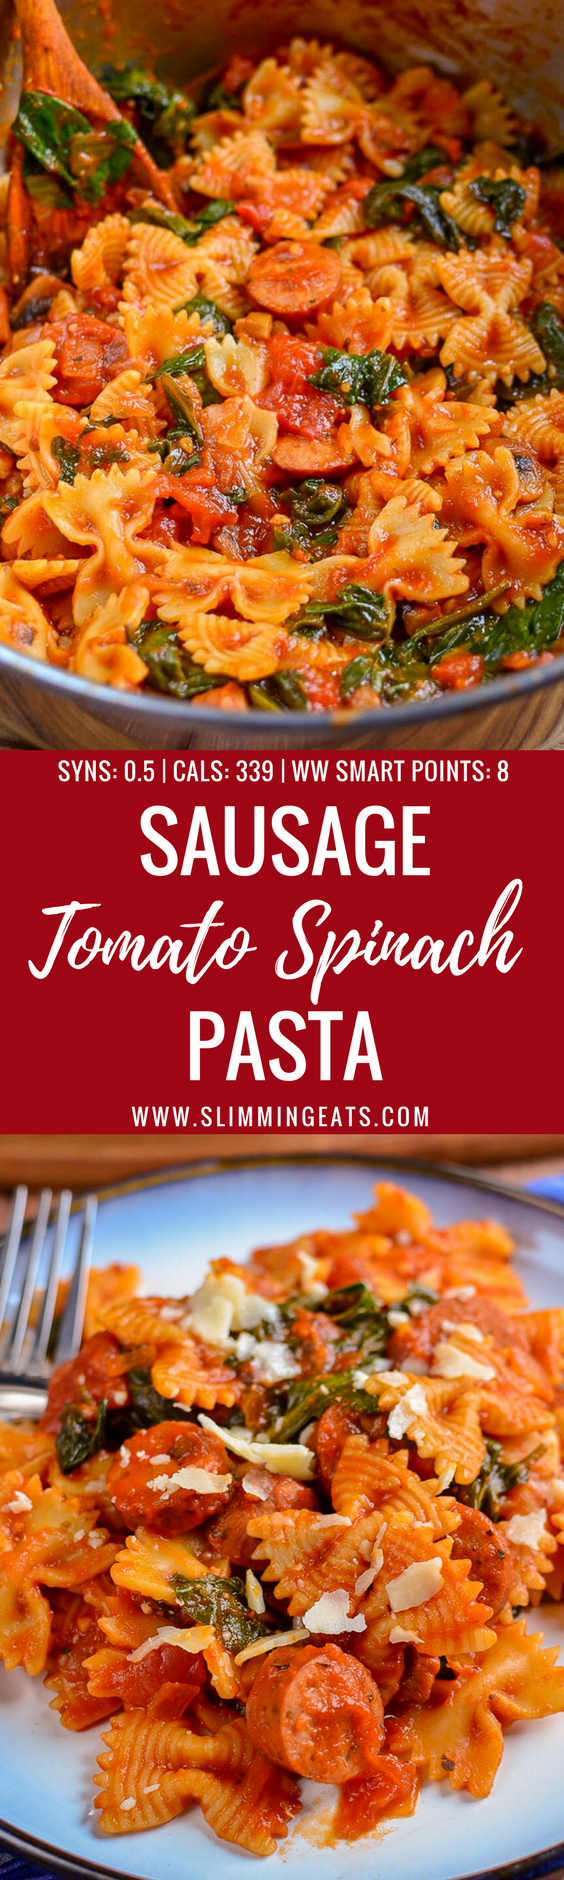 Serve pasta for dinner with the delicious flavours in this super quick Sausage, Tomato and Spinach Pasta -  a perfect family meal. - Gluten free, dairy free, vegetarian, Slimming World and Weight Watchers friendly